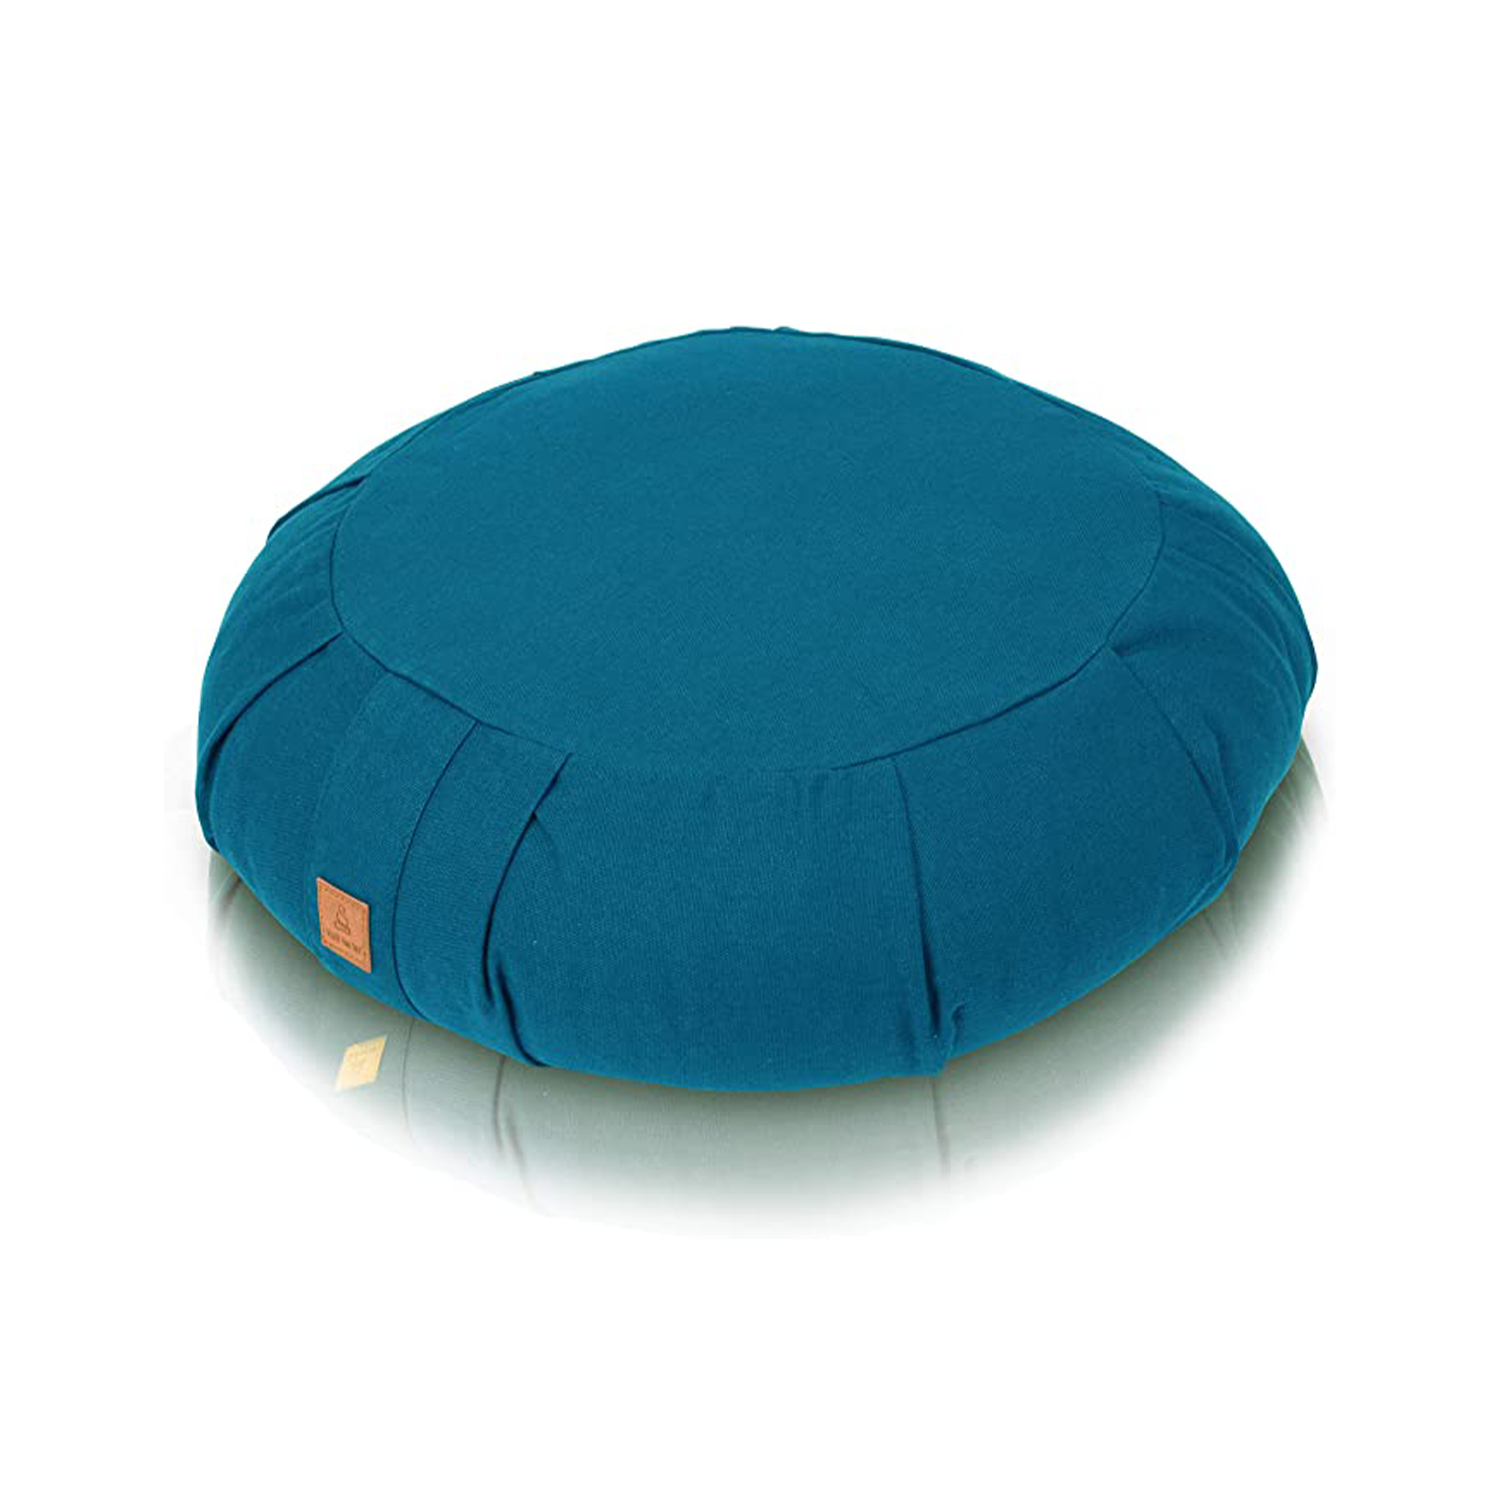 Seat Of Your Soul Meditation Cushion